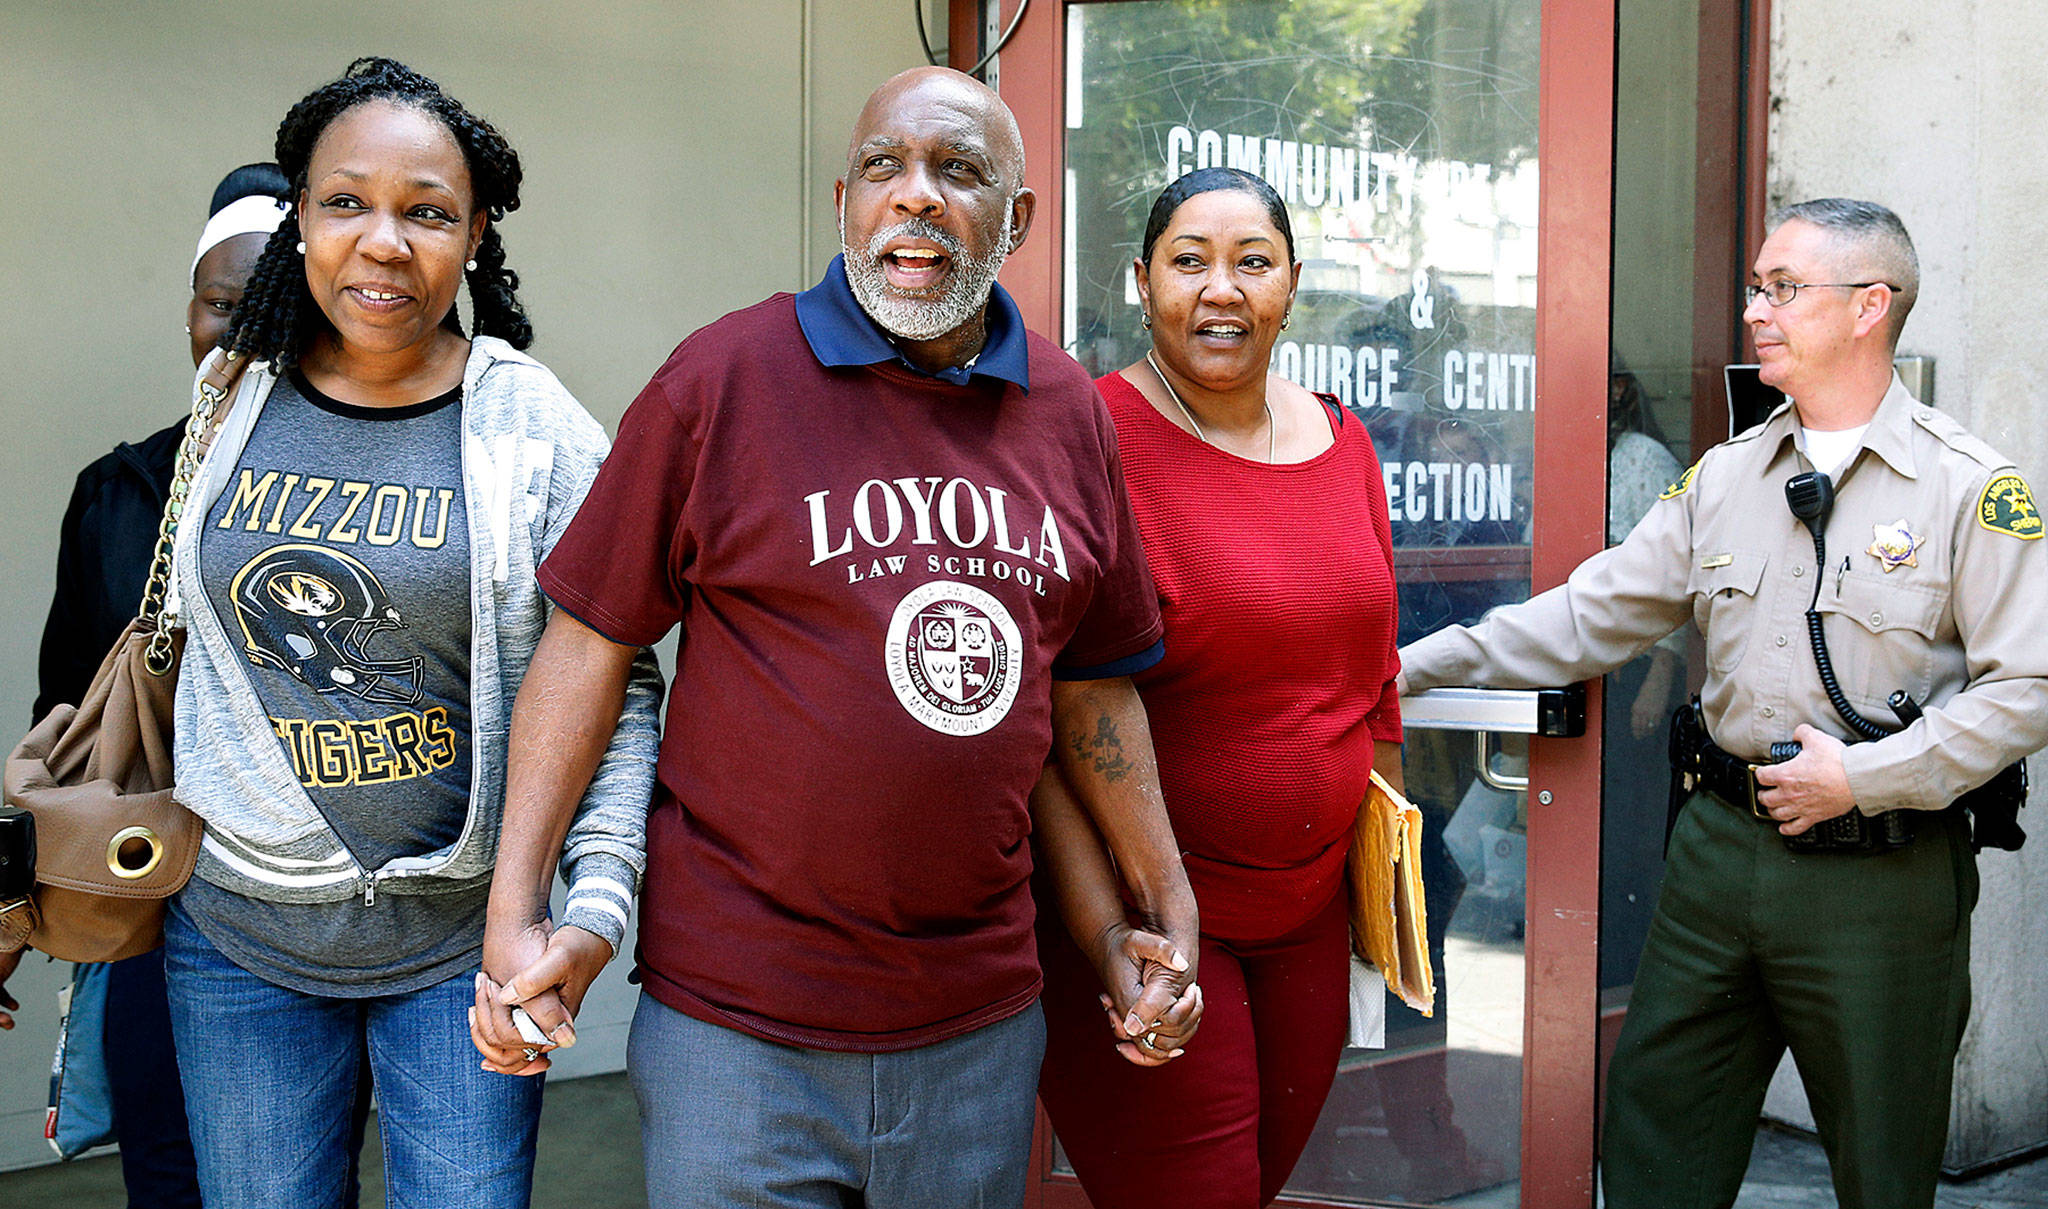 Andrew Wilson (center) is accompanied by daughters Catrina Burks (left) and Gwen Wilson as he leaves the Men’s Central Jail in Los Angeles on Thursday. (AP Photo/Nick Ut)